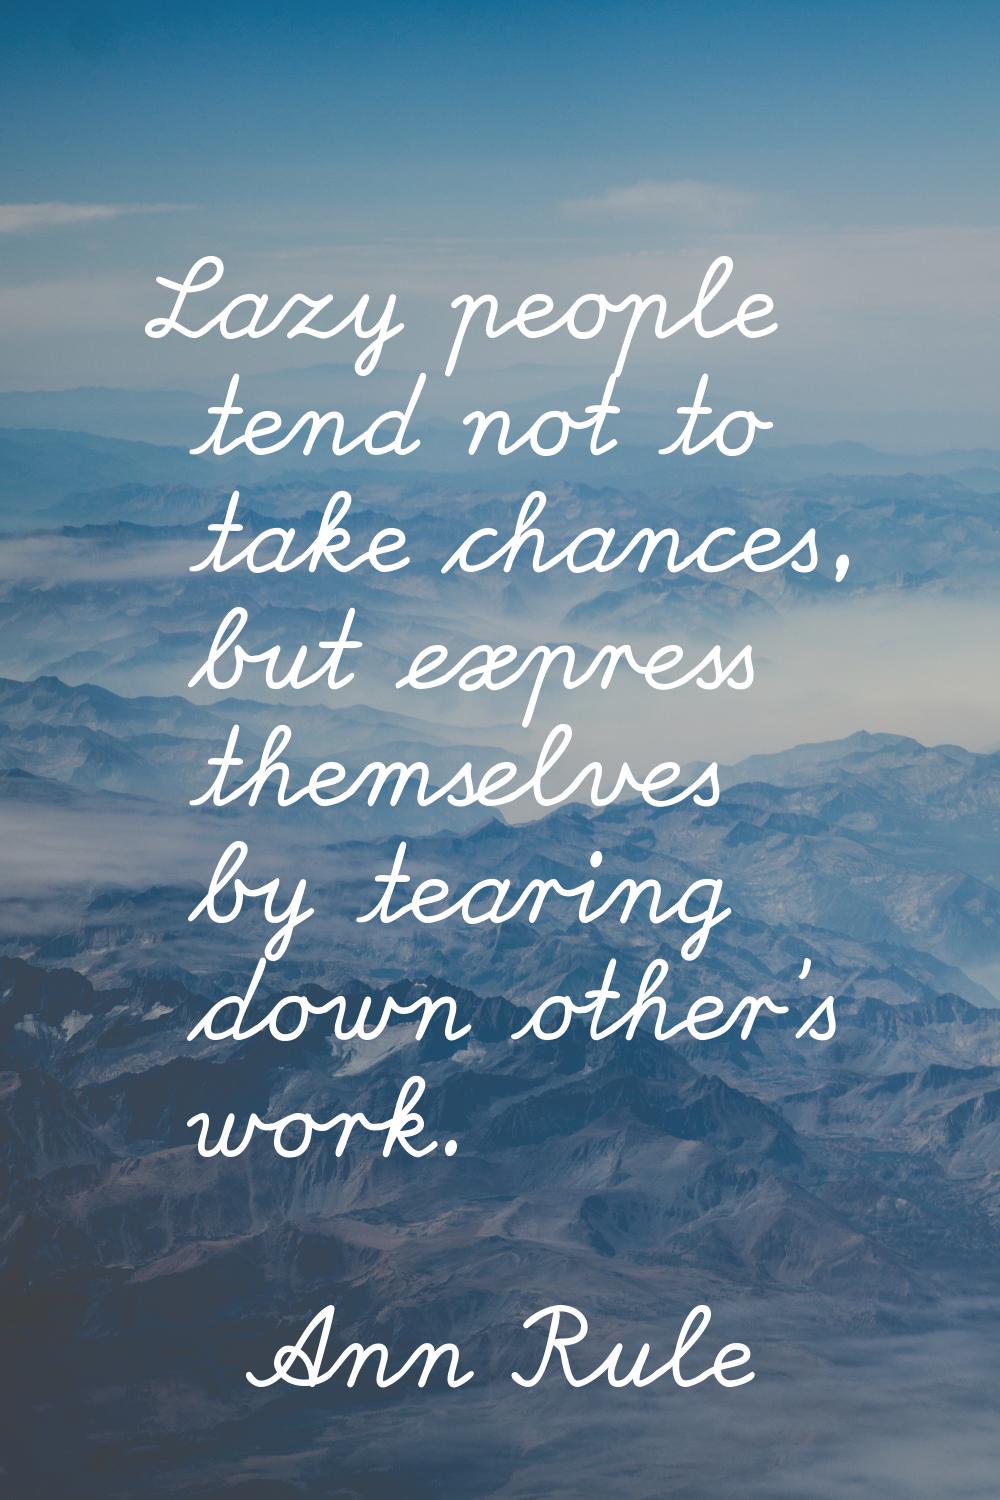 Lazy people tend not to take chances, but express themselves by tearing down other's work.